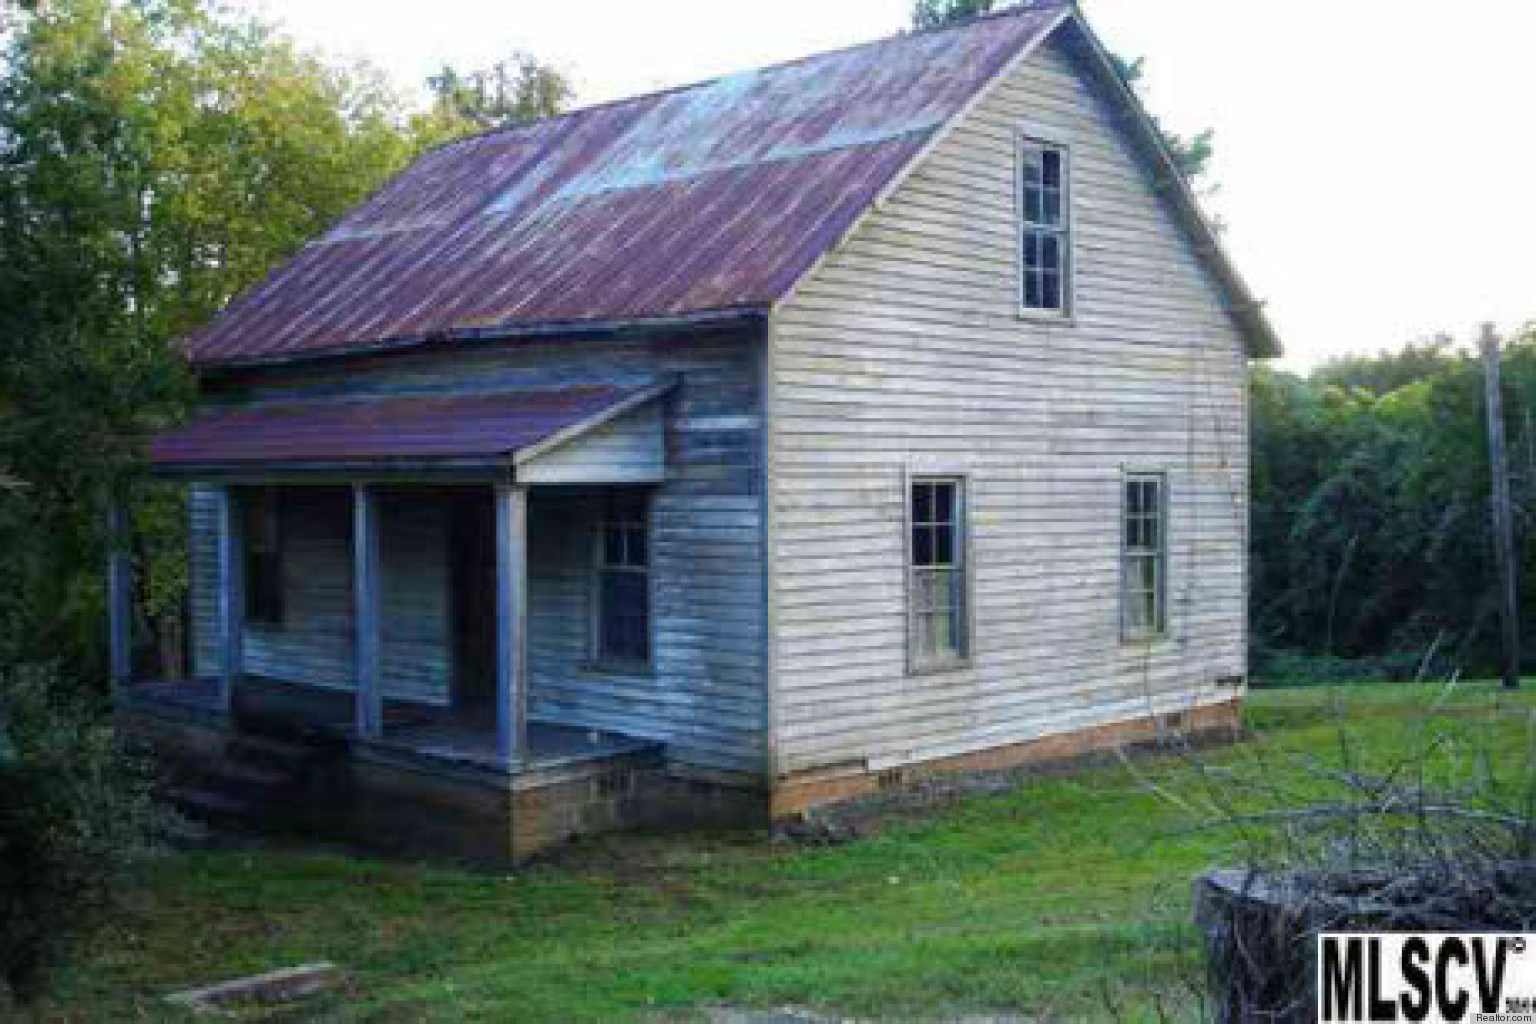 Vermont Hungry Empty Washington House Divorced And